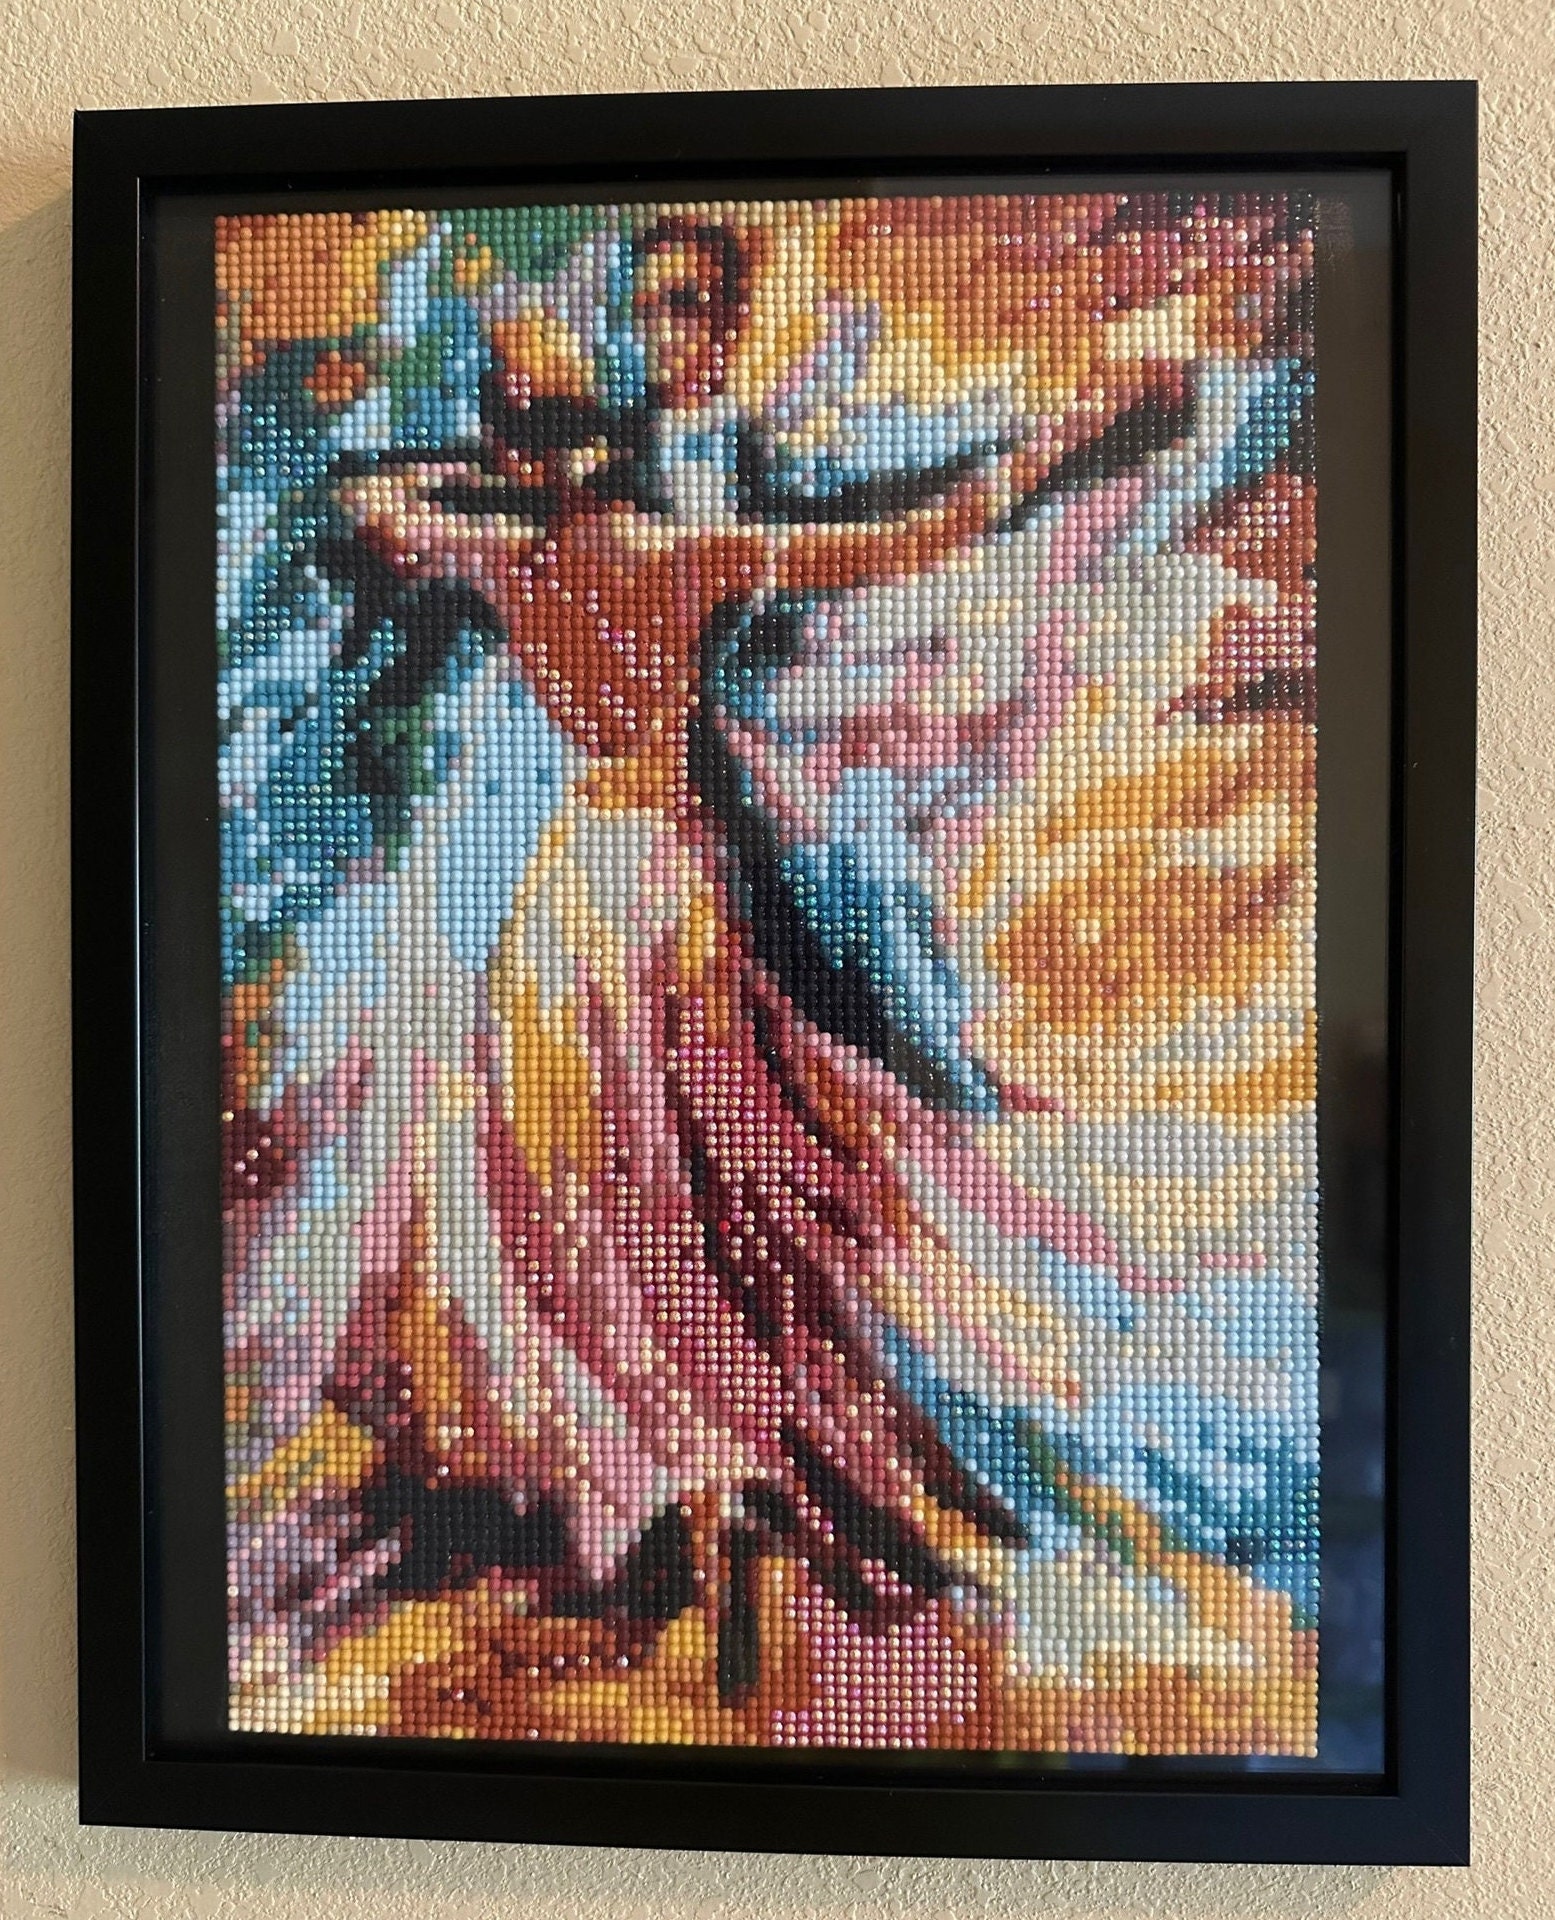 Framed Finished Diamond Art Painting, 11x14in. 